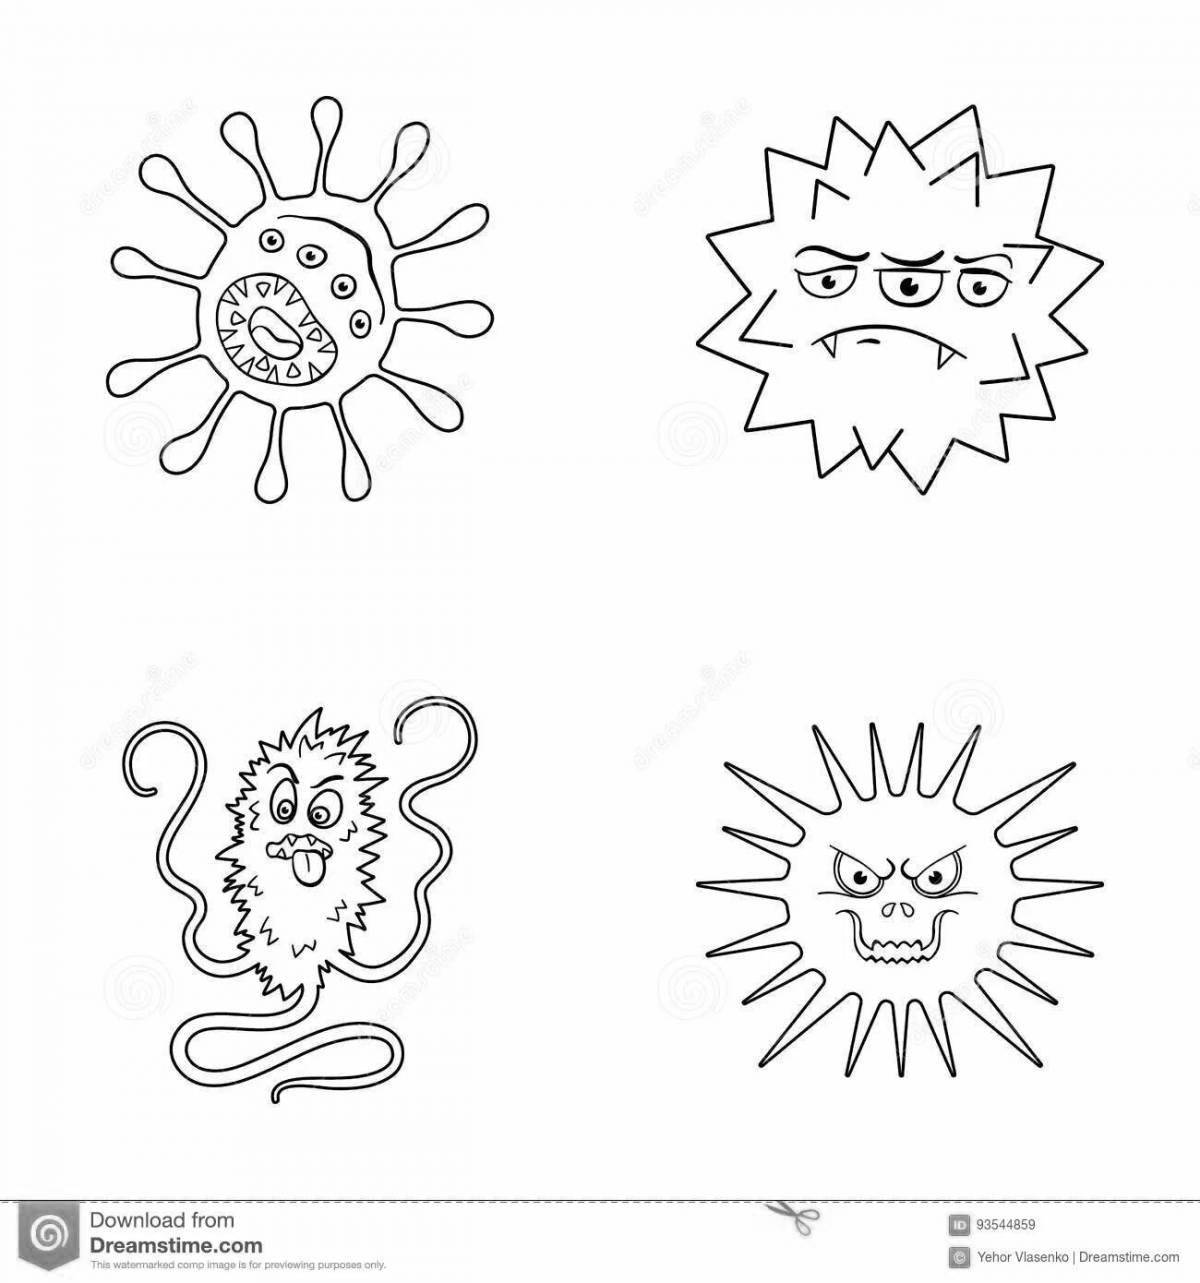 Colouring bright viruses and microbes